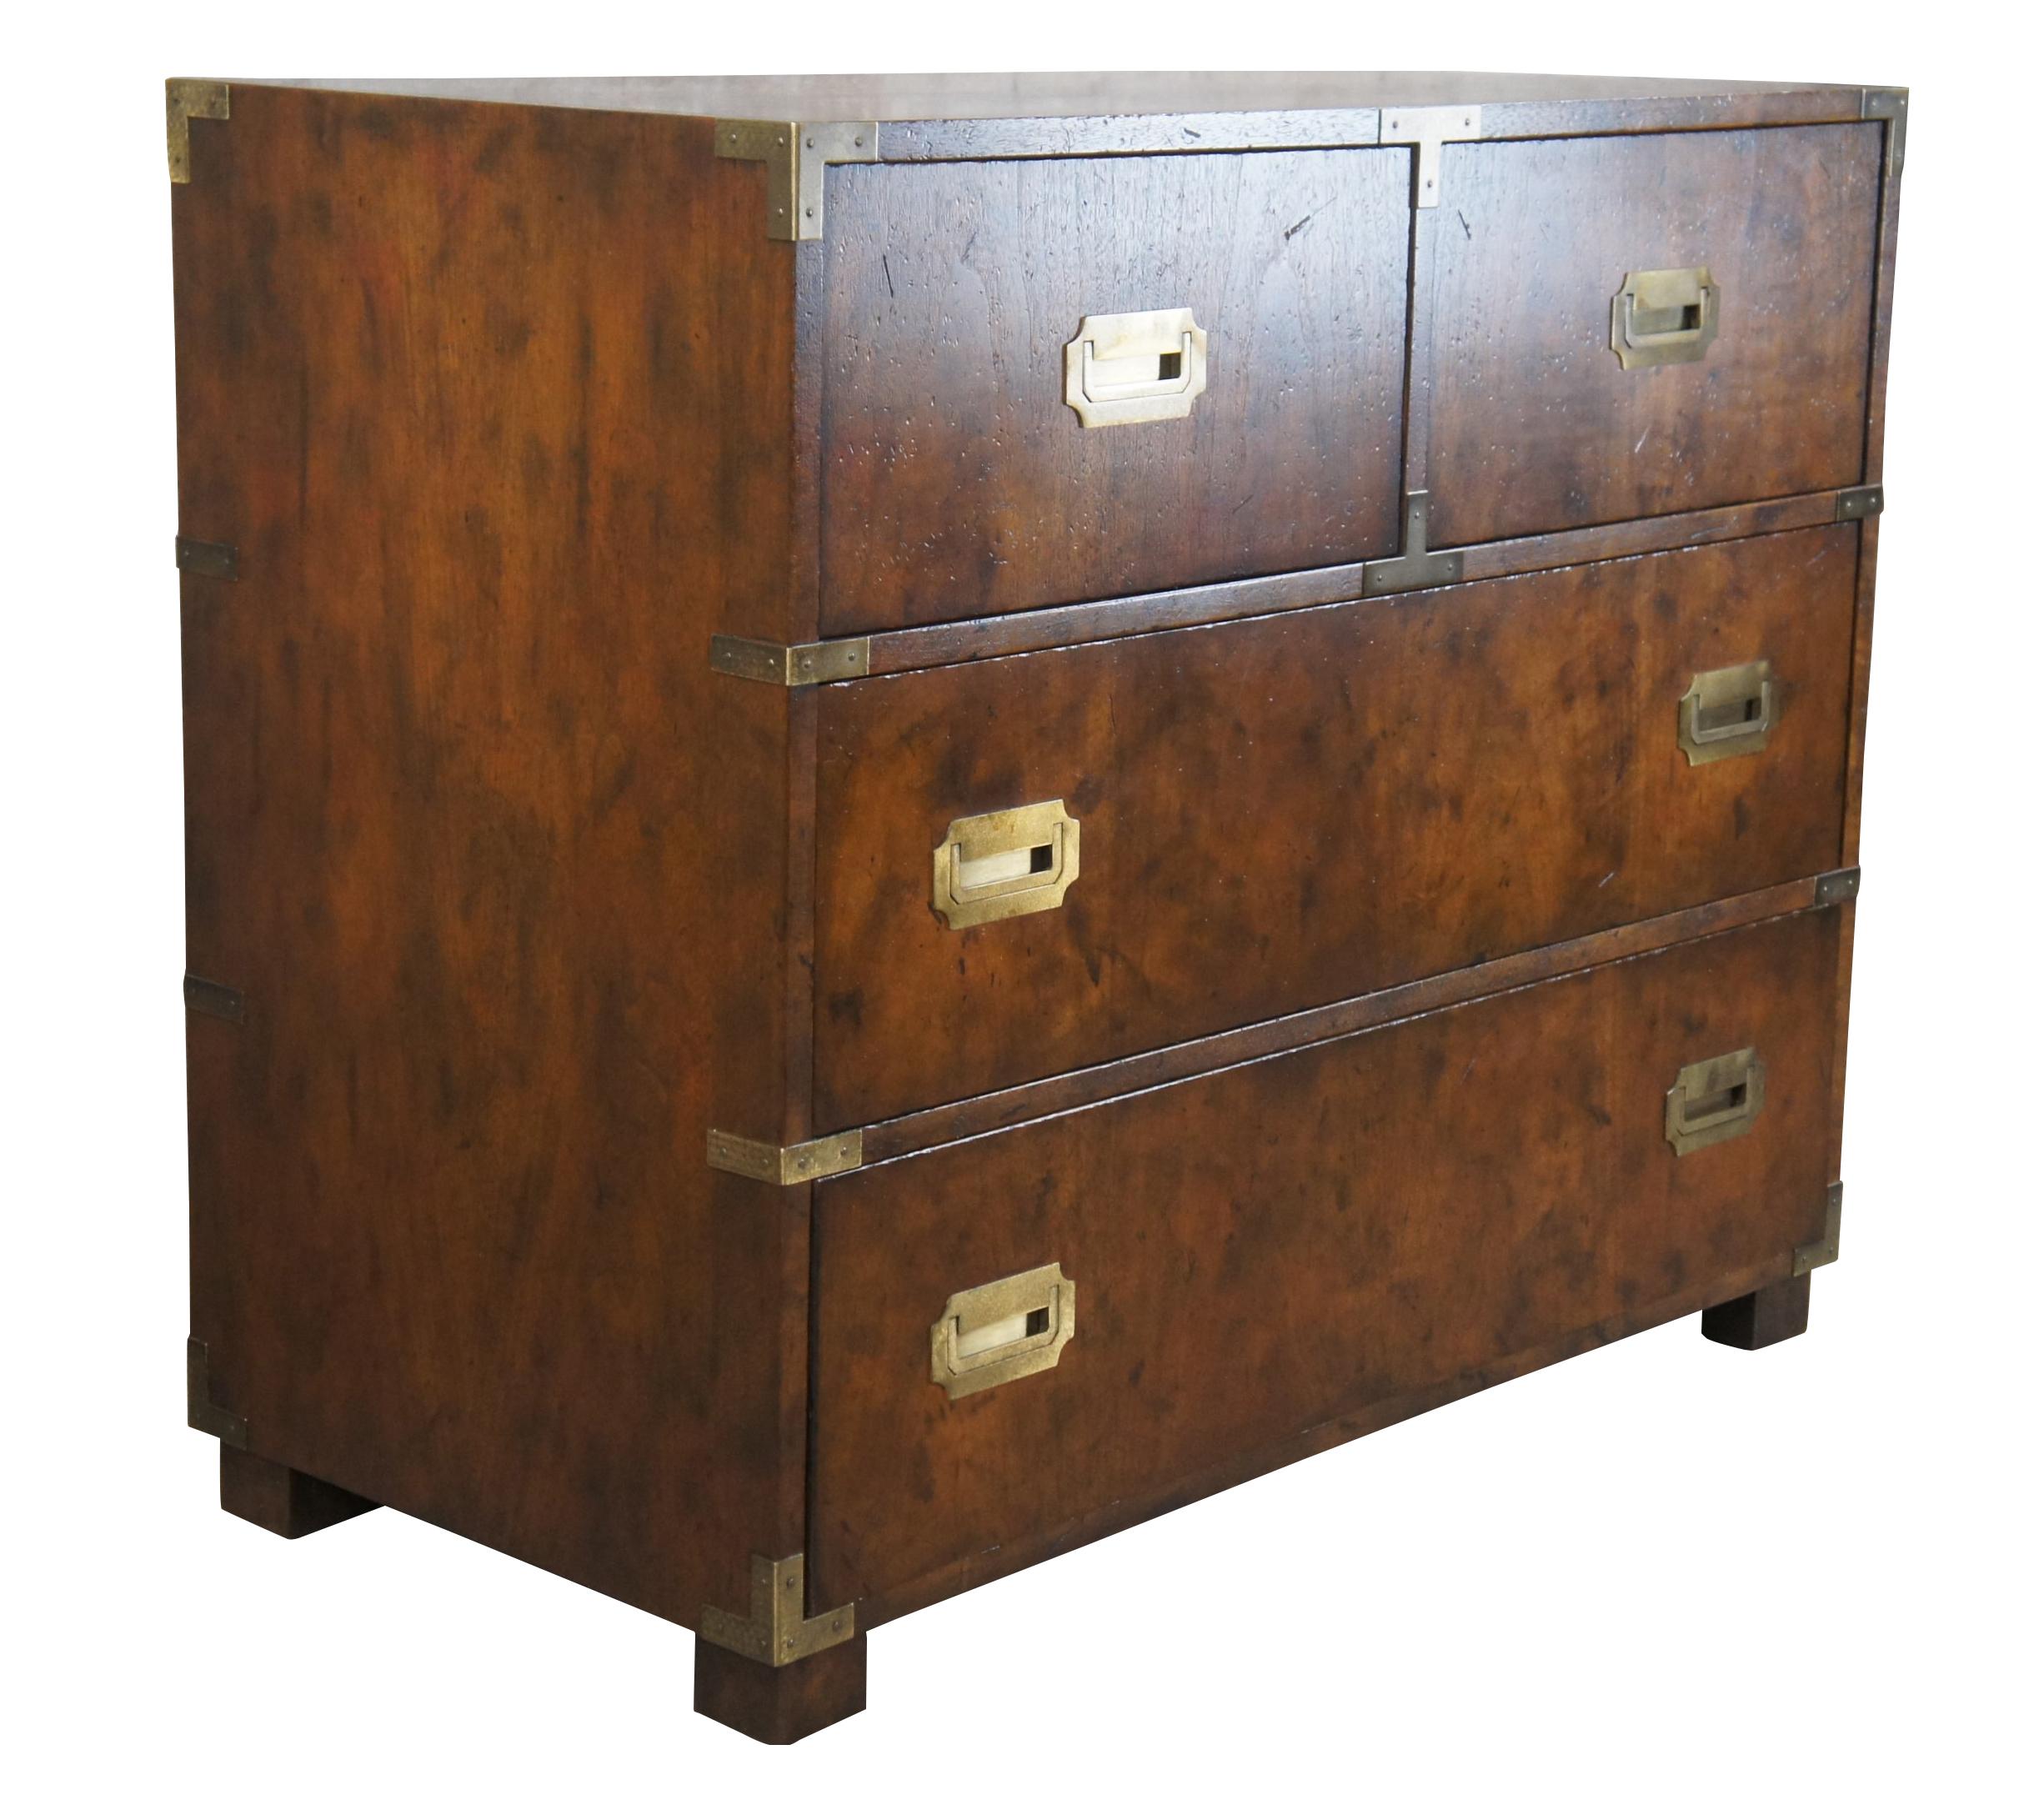 A stunning Anglo Indian style Campaign Dresser or Chest of Drawers by Baker Furniture, circa 1960s. Part of the Far East Collection. Made from European Walnut with a naturally distressed two over two drawer form. The dresser is accented by brass